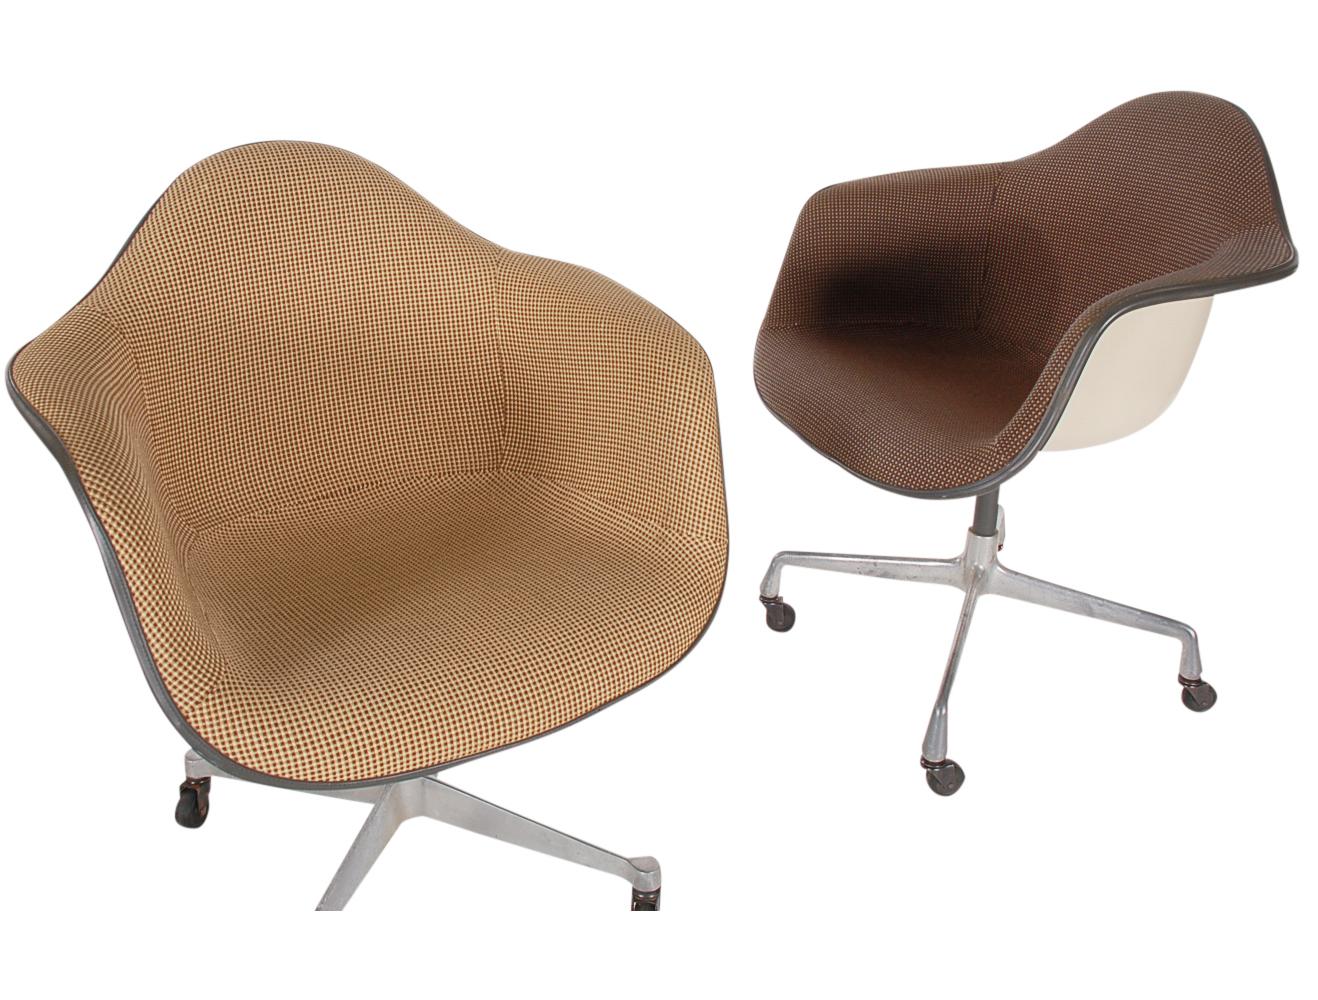 A super clean vintage set of original armchairs designed by Charles Eames for Herman Miller. They feature molded fiberglass buckets seats with complimenting upholstery, and caster bases. Manufacturer labels to both.